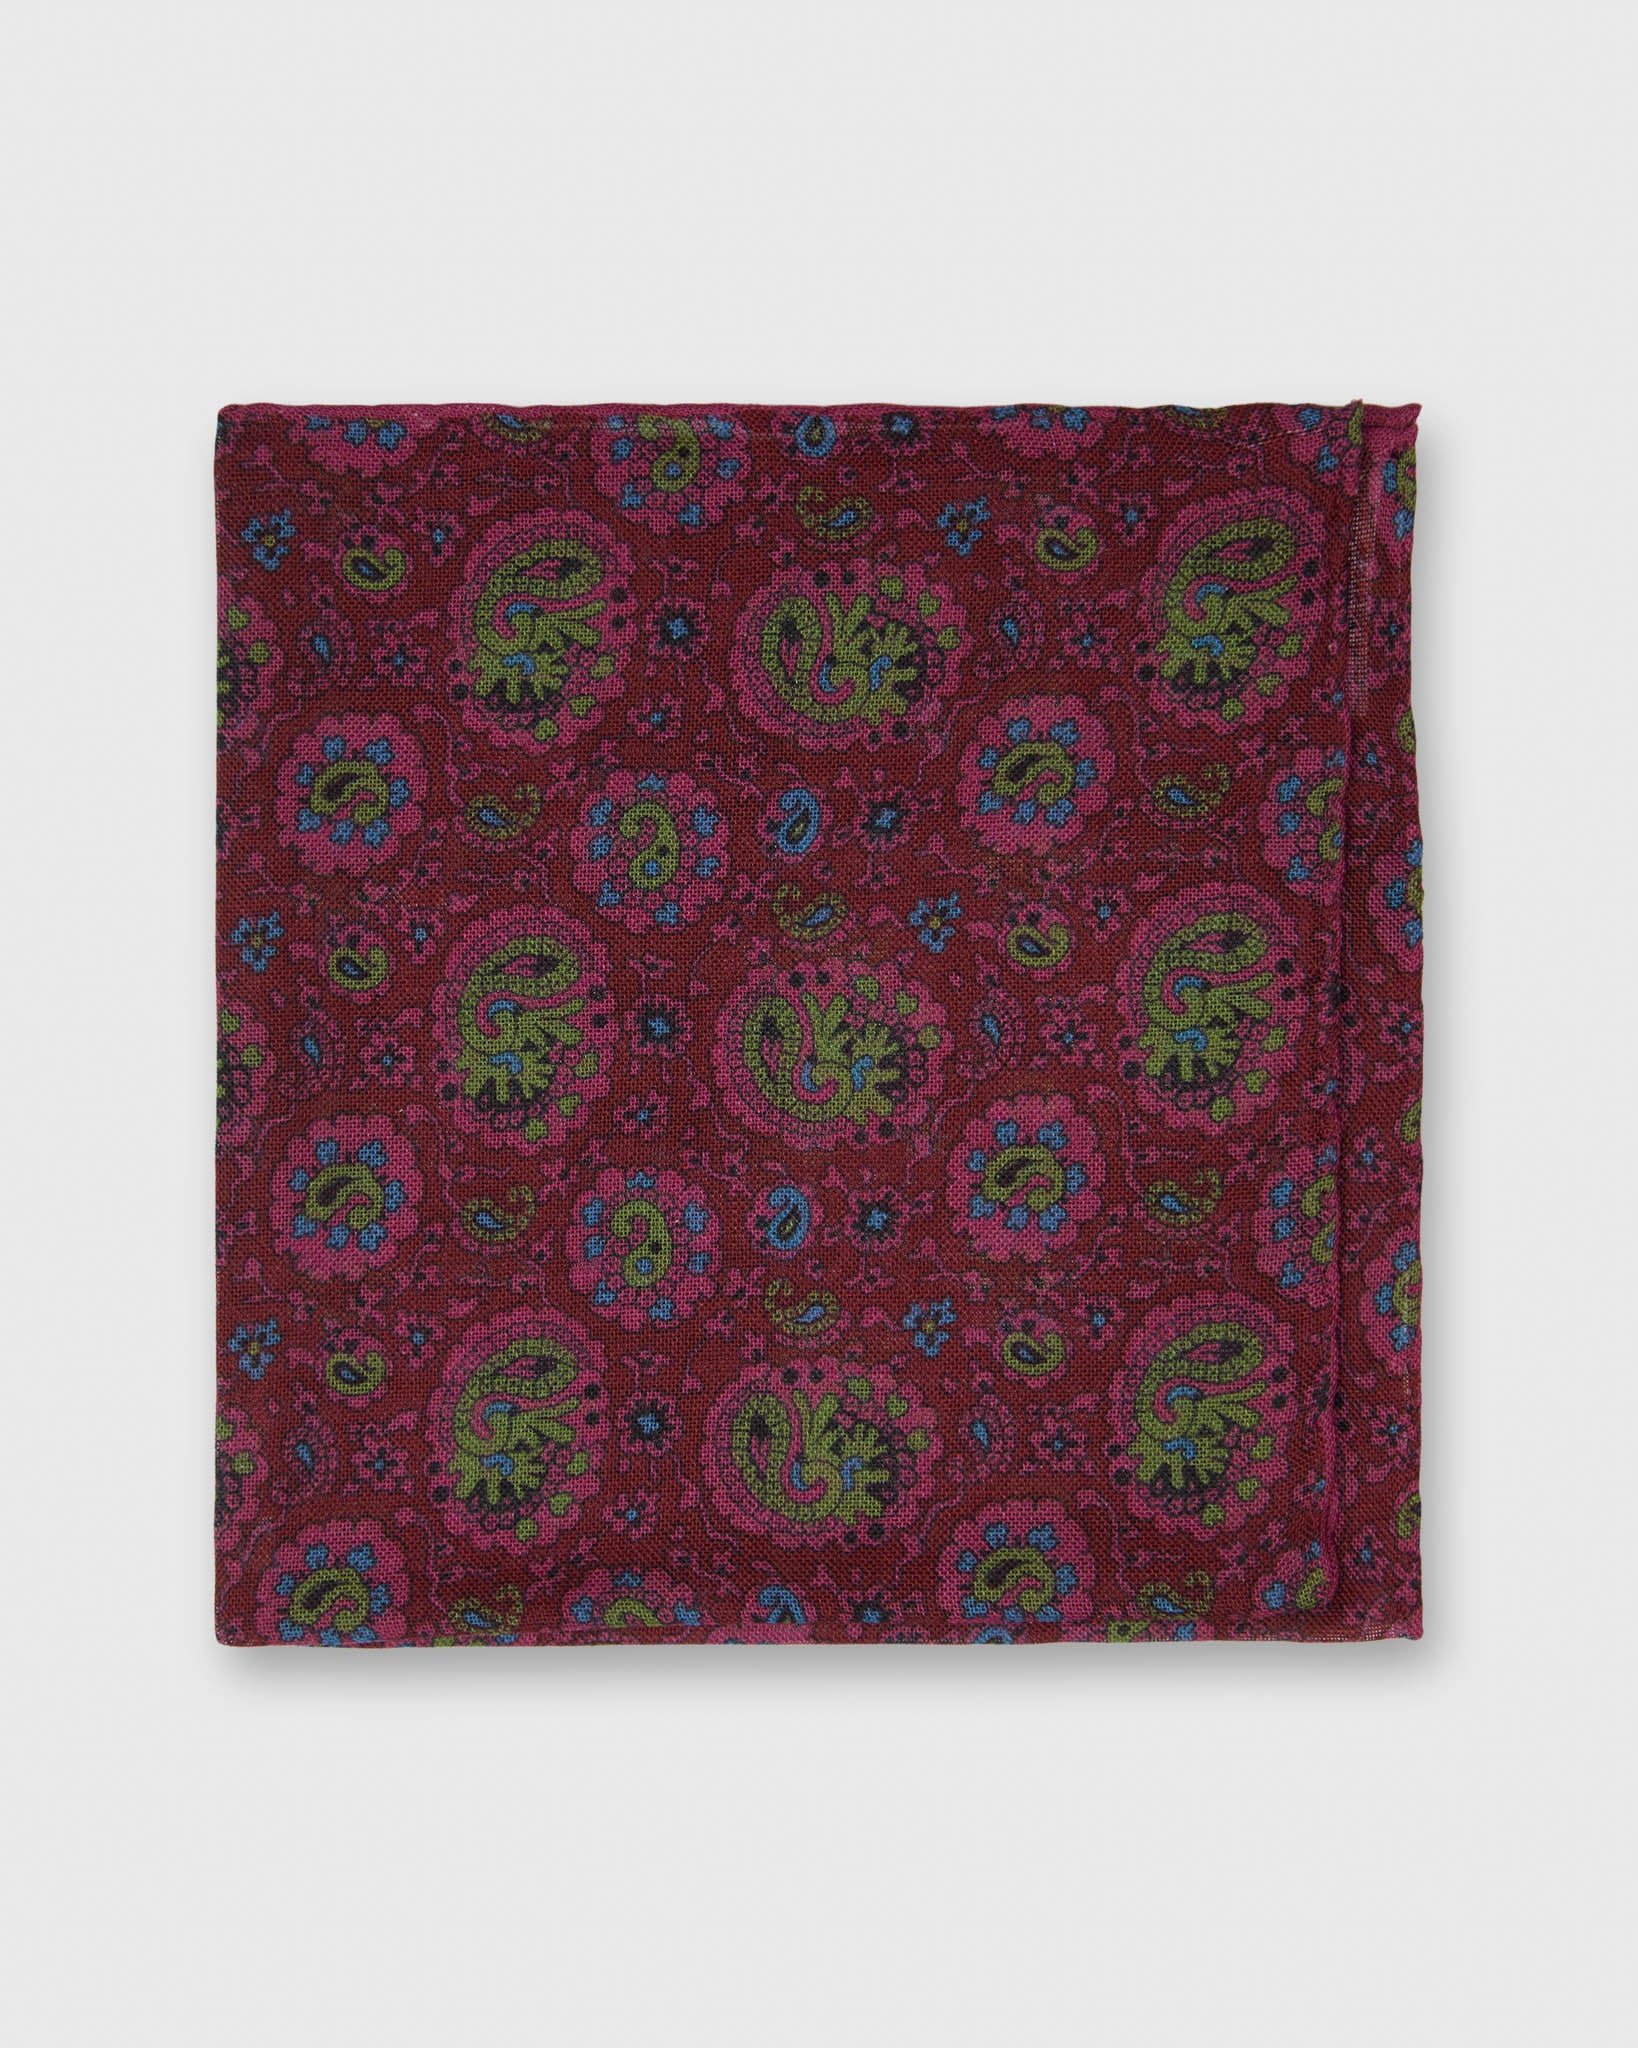 Hand-Rolled Pocket Square in Pink Paisley